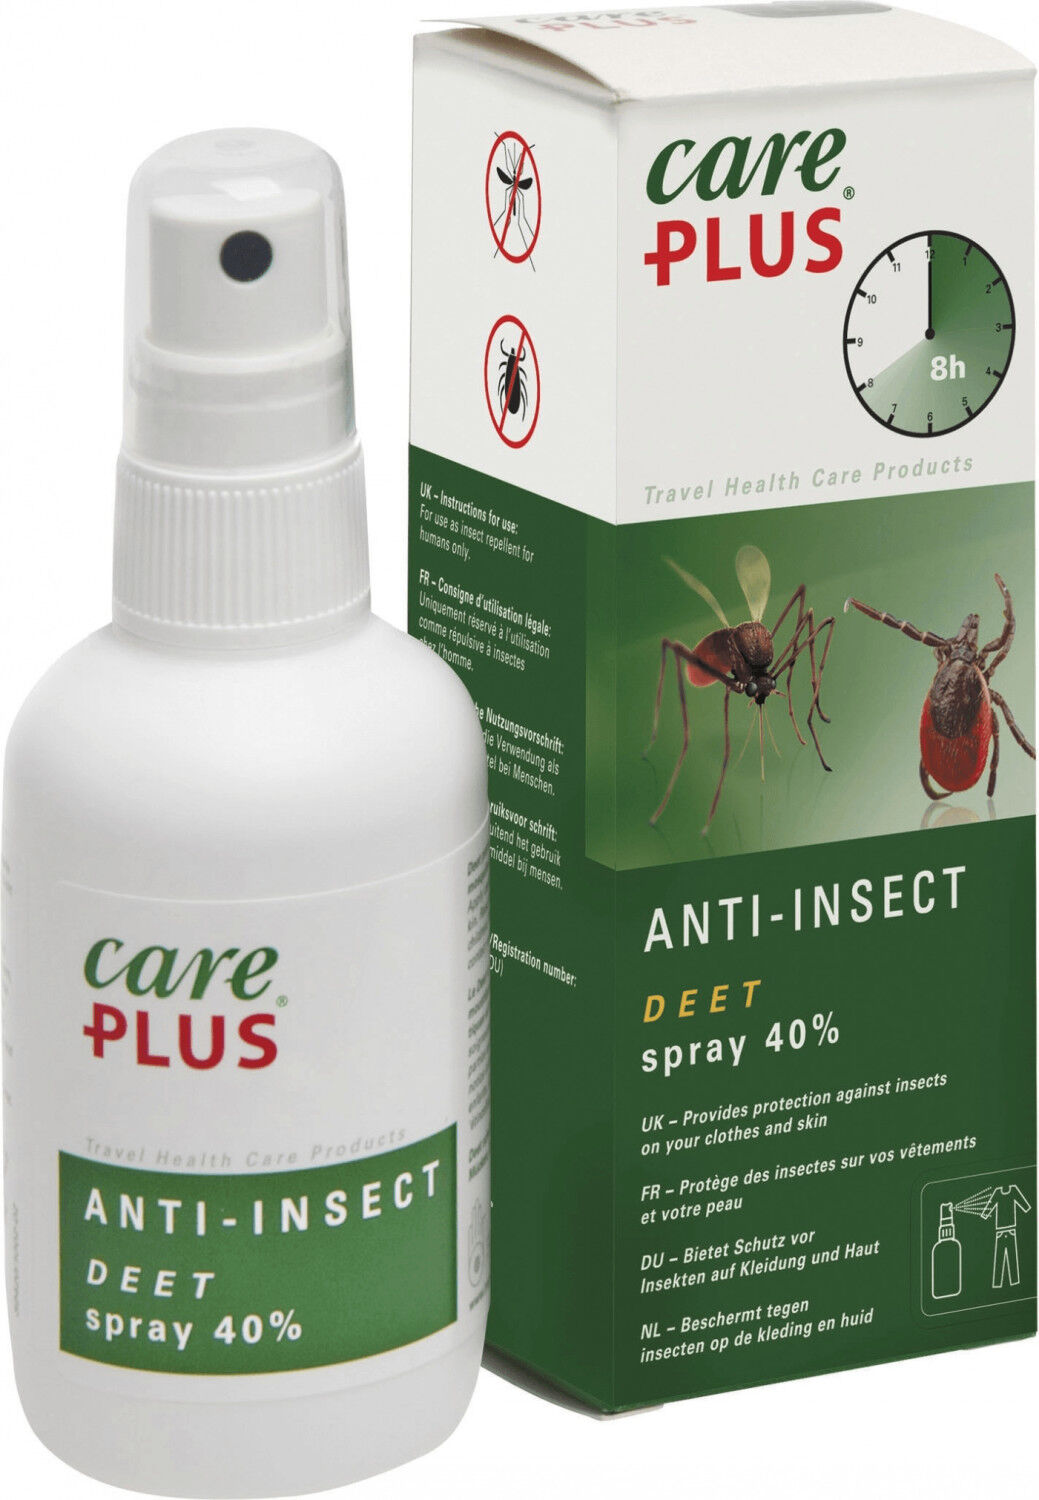 Care Plus Anti-Insect - Deet spray 40% - Insectenbescherming